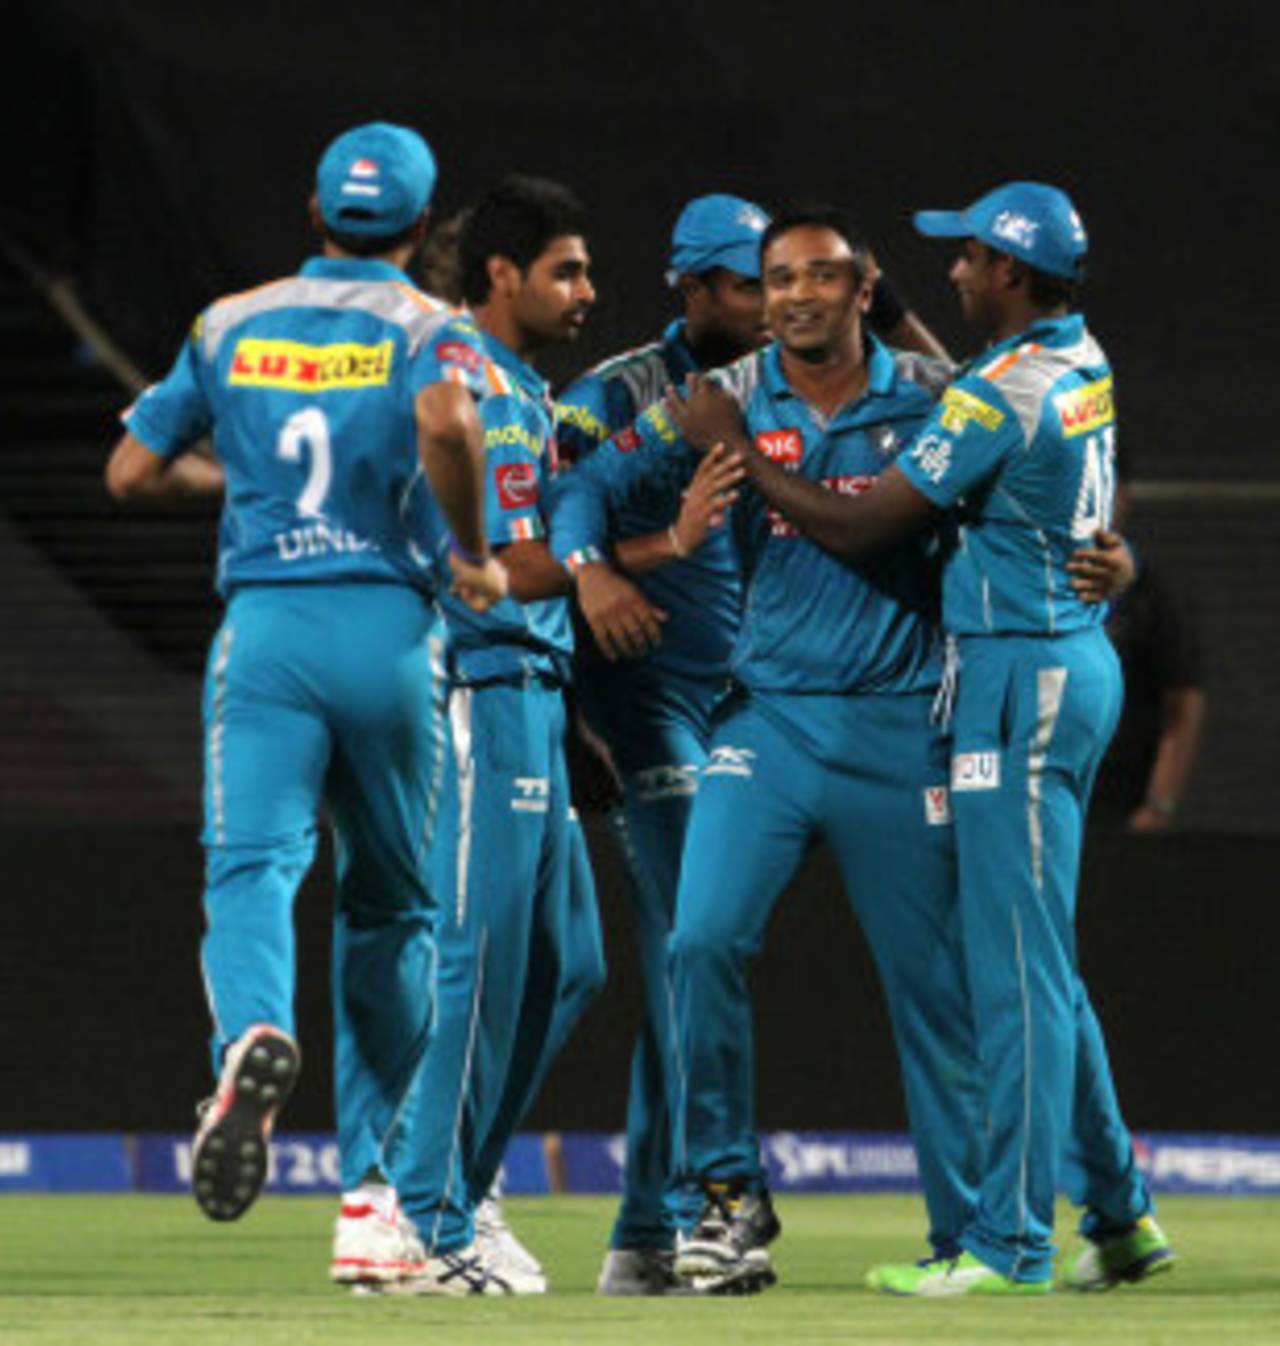 Sahara India, owners of the Pune Warriors franchise, pulled out of the IPL for a second time&nbsp;&nbsp;&bull;&nbsp;&nbsp;BCCI